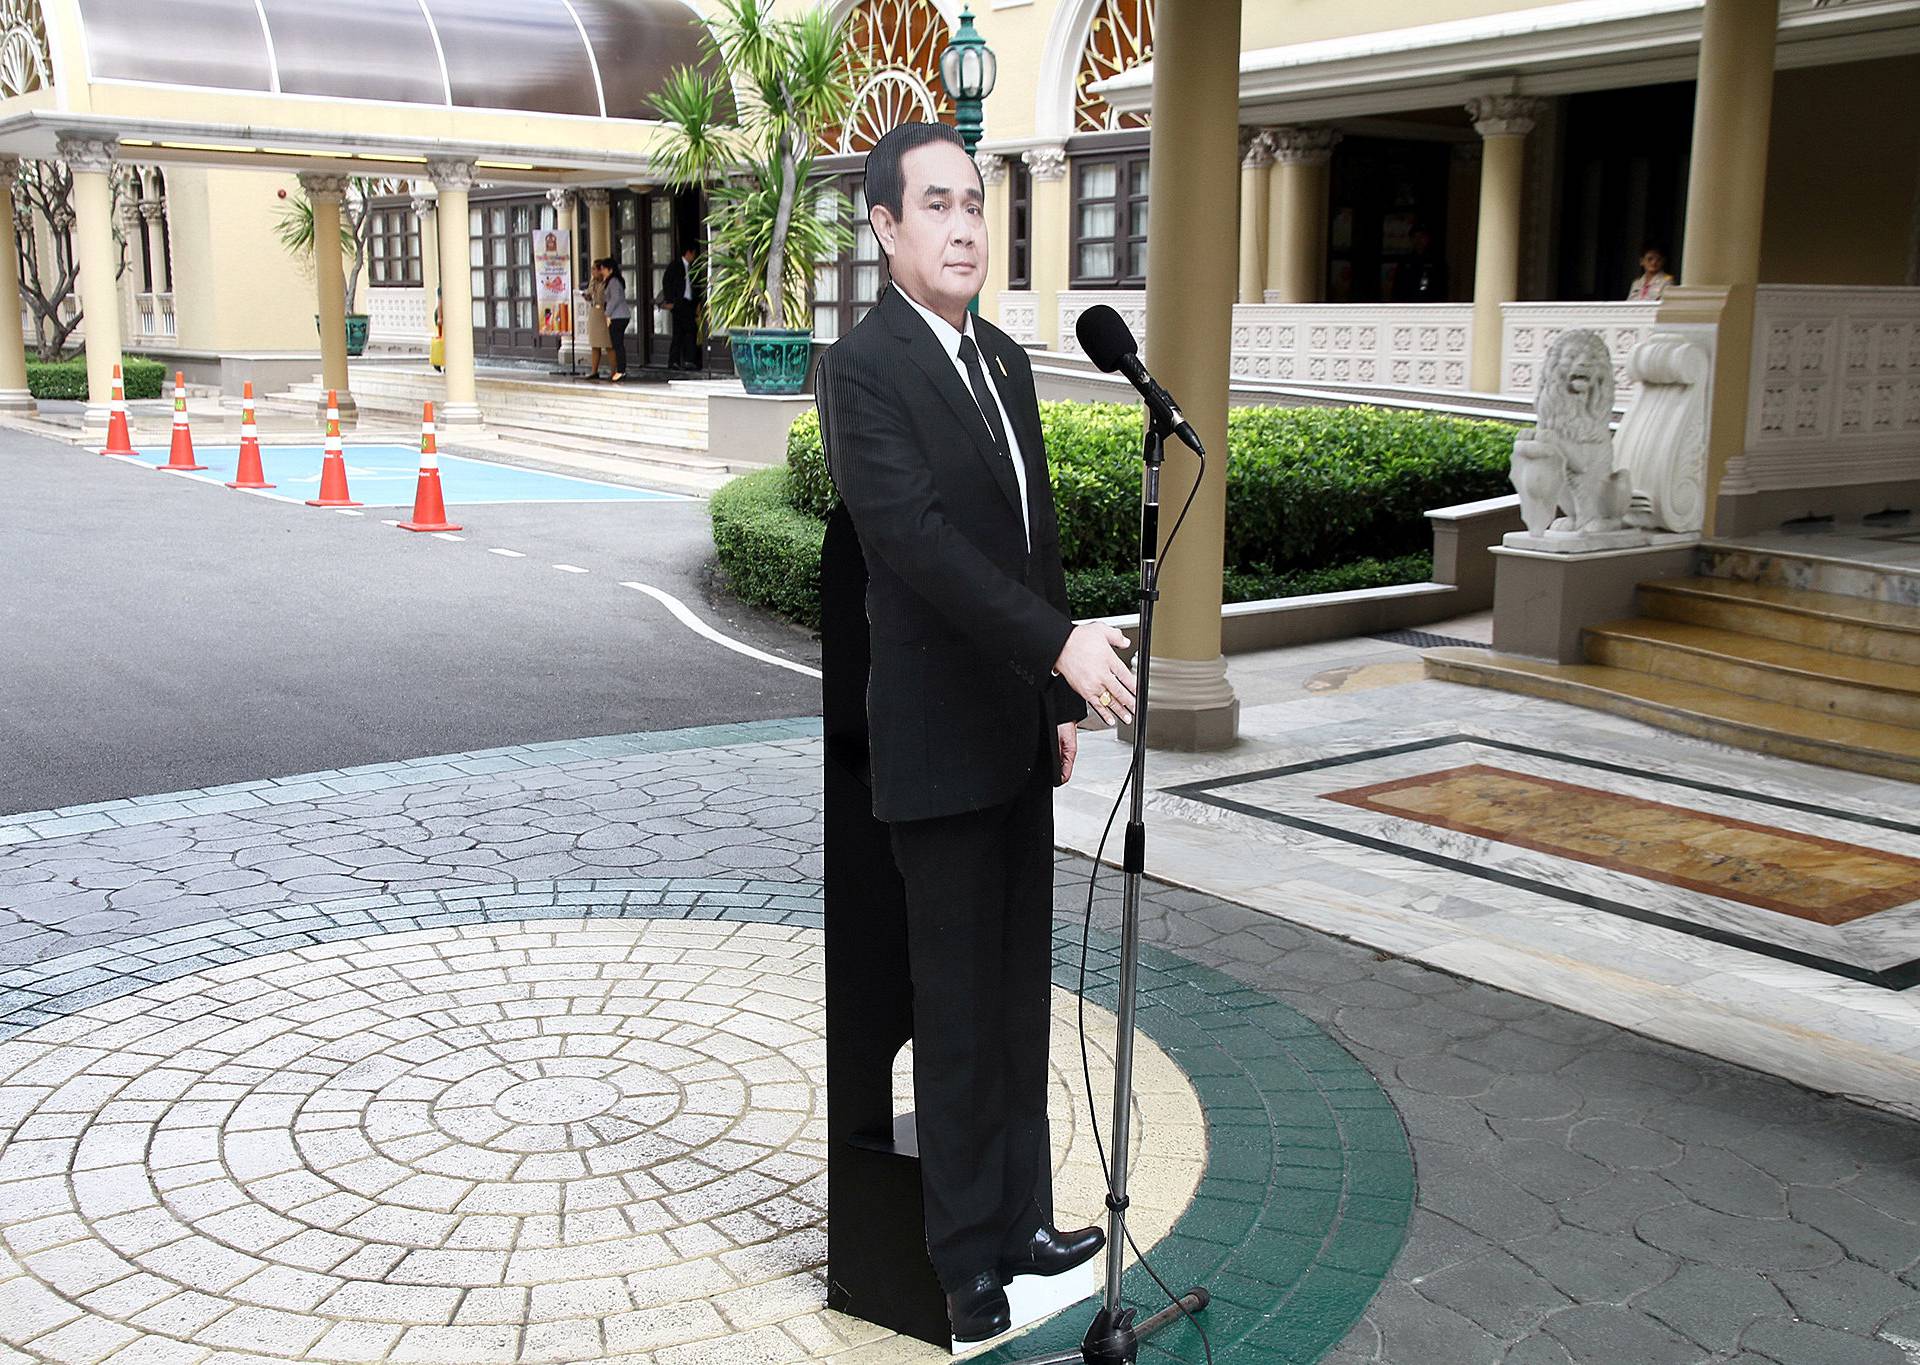 A cardboard cut-out of Thailand's Prime Minster Prayuth Chan-ocha is seen next to a microphone after a news conference at government house in Bangkok